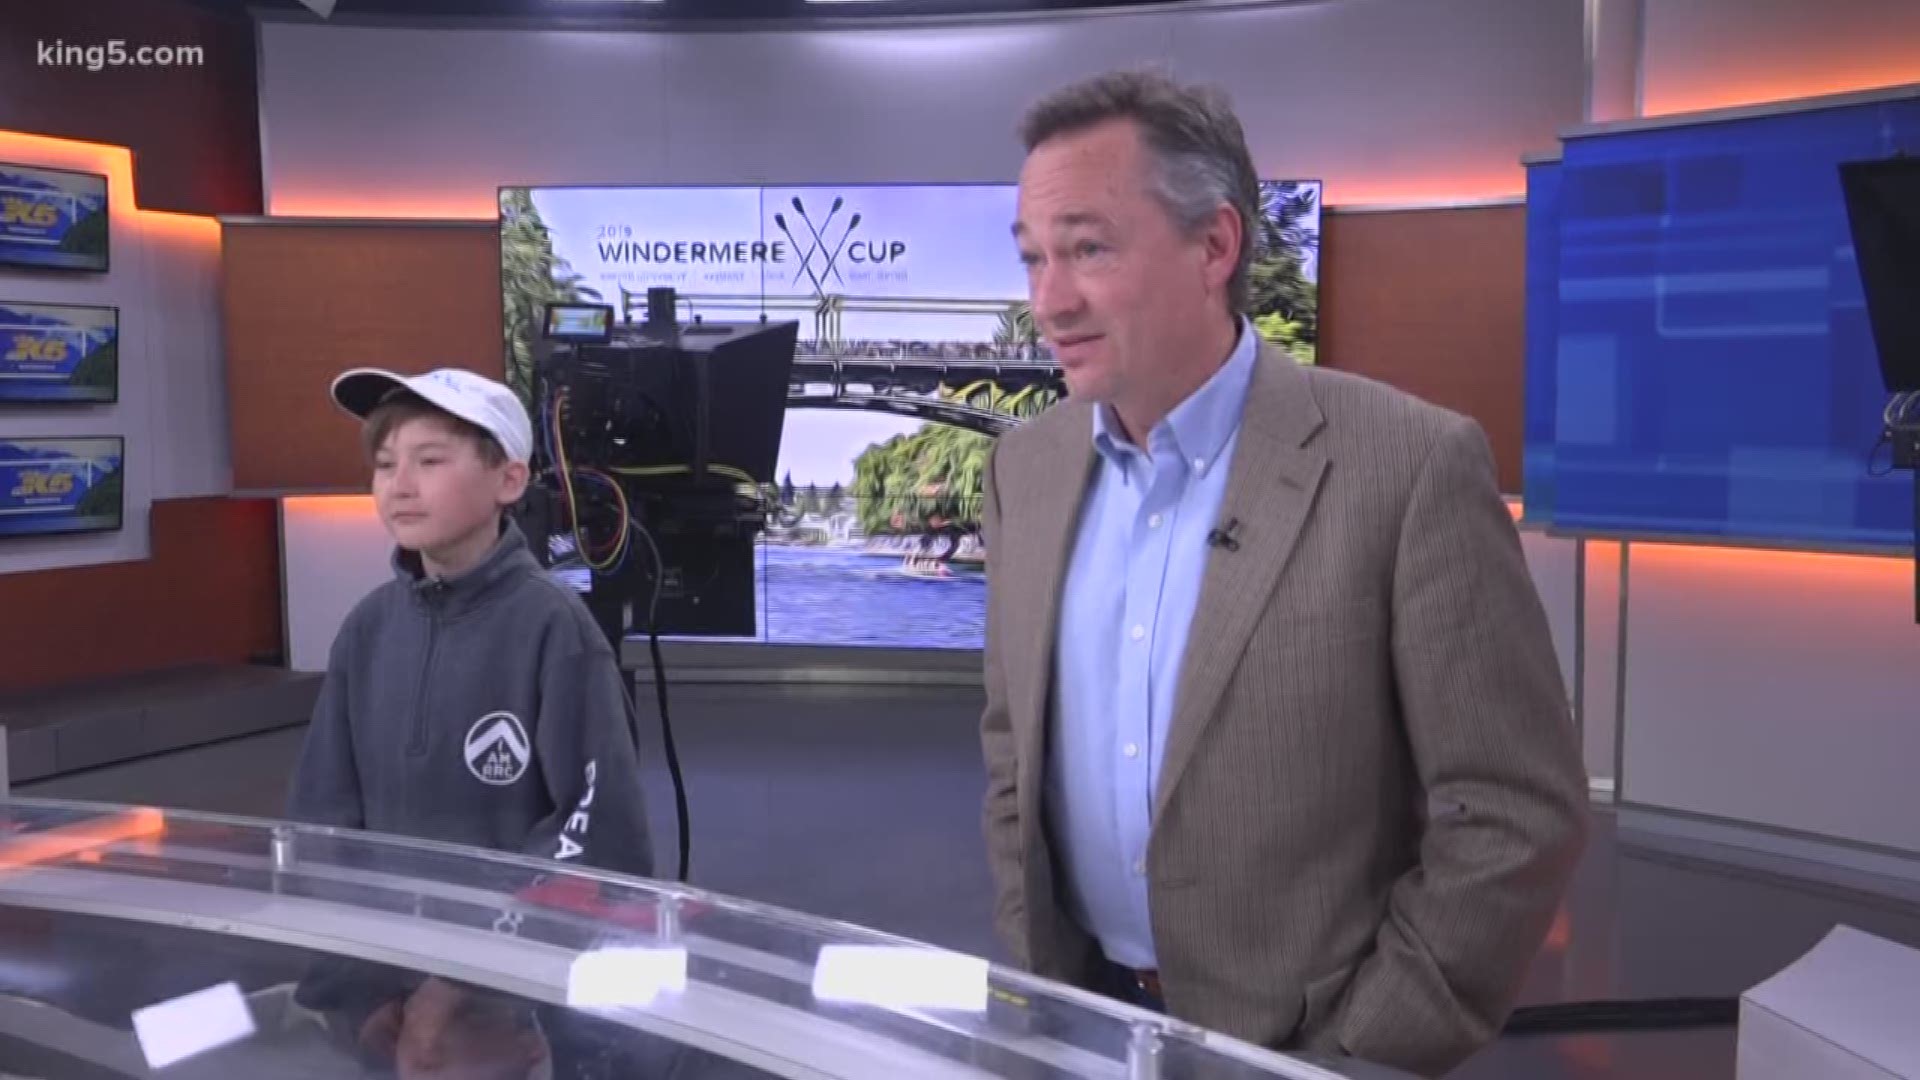 The best rowers in the world are in Seattle this week for the Windermere Cup. UW Rowing Historian Eric Cohen and 12-year-old coxswain Quintin Petersen talk about the 2019 Windermere Cup and the growth of rowing as a sport.